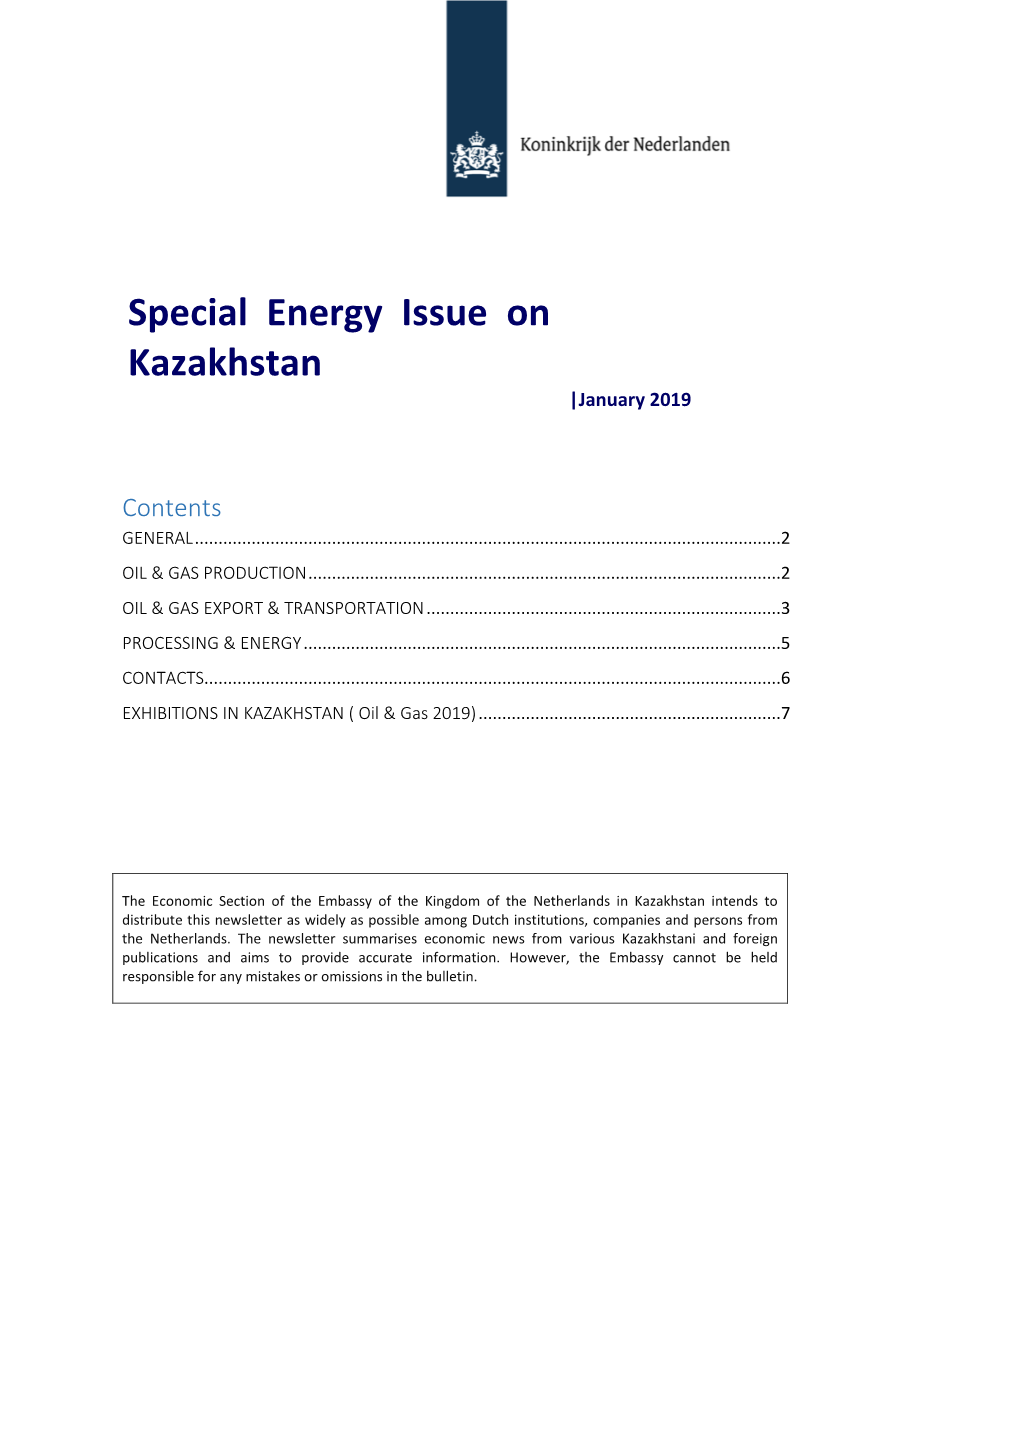 Special Energy Issue on Kazakhstan |January 2019